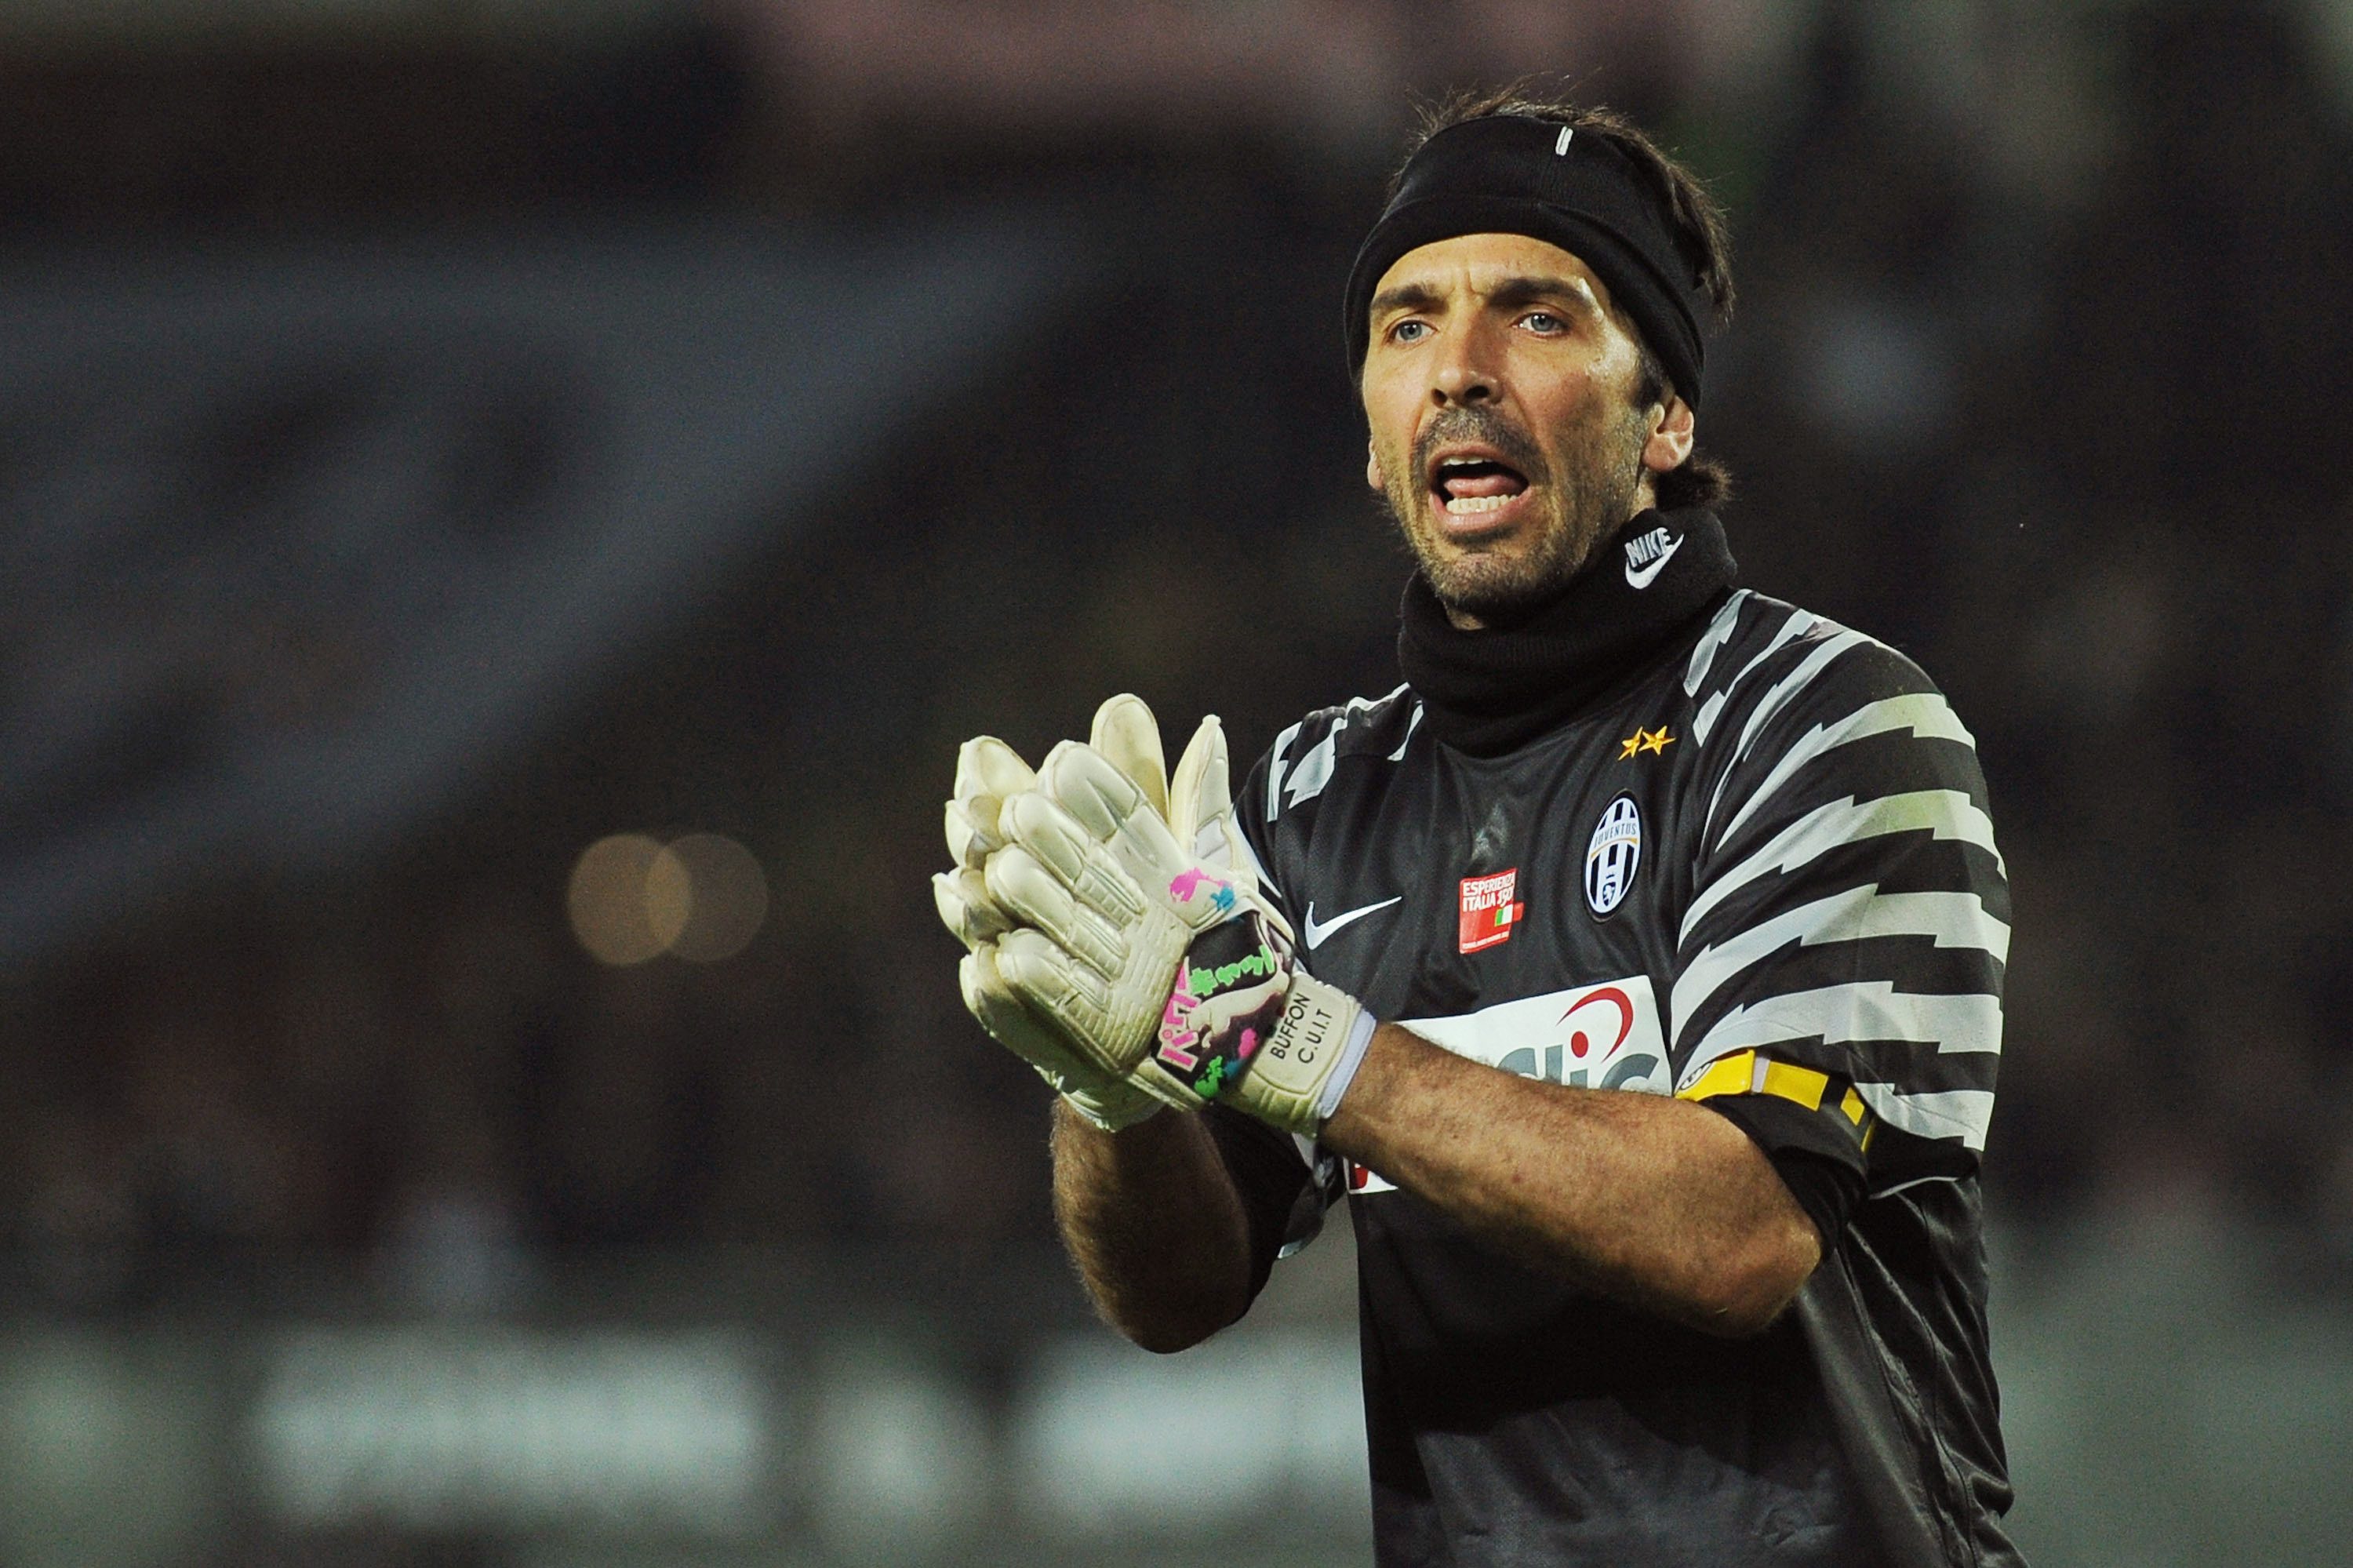 Gianluigi Buffon and his hefty salary could exit Juventus according to reports